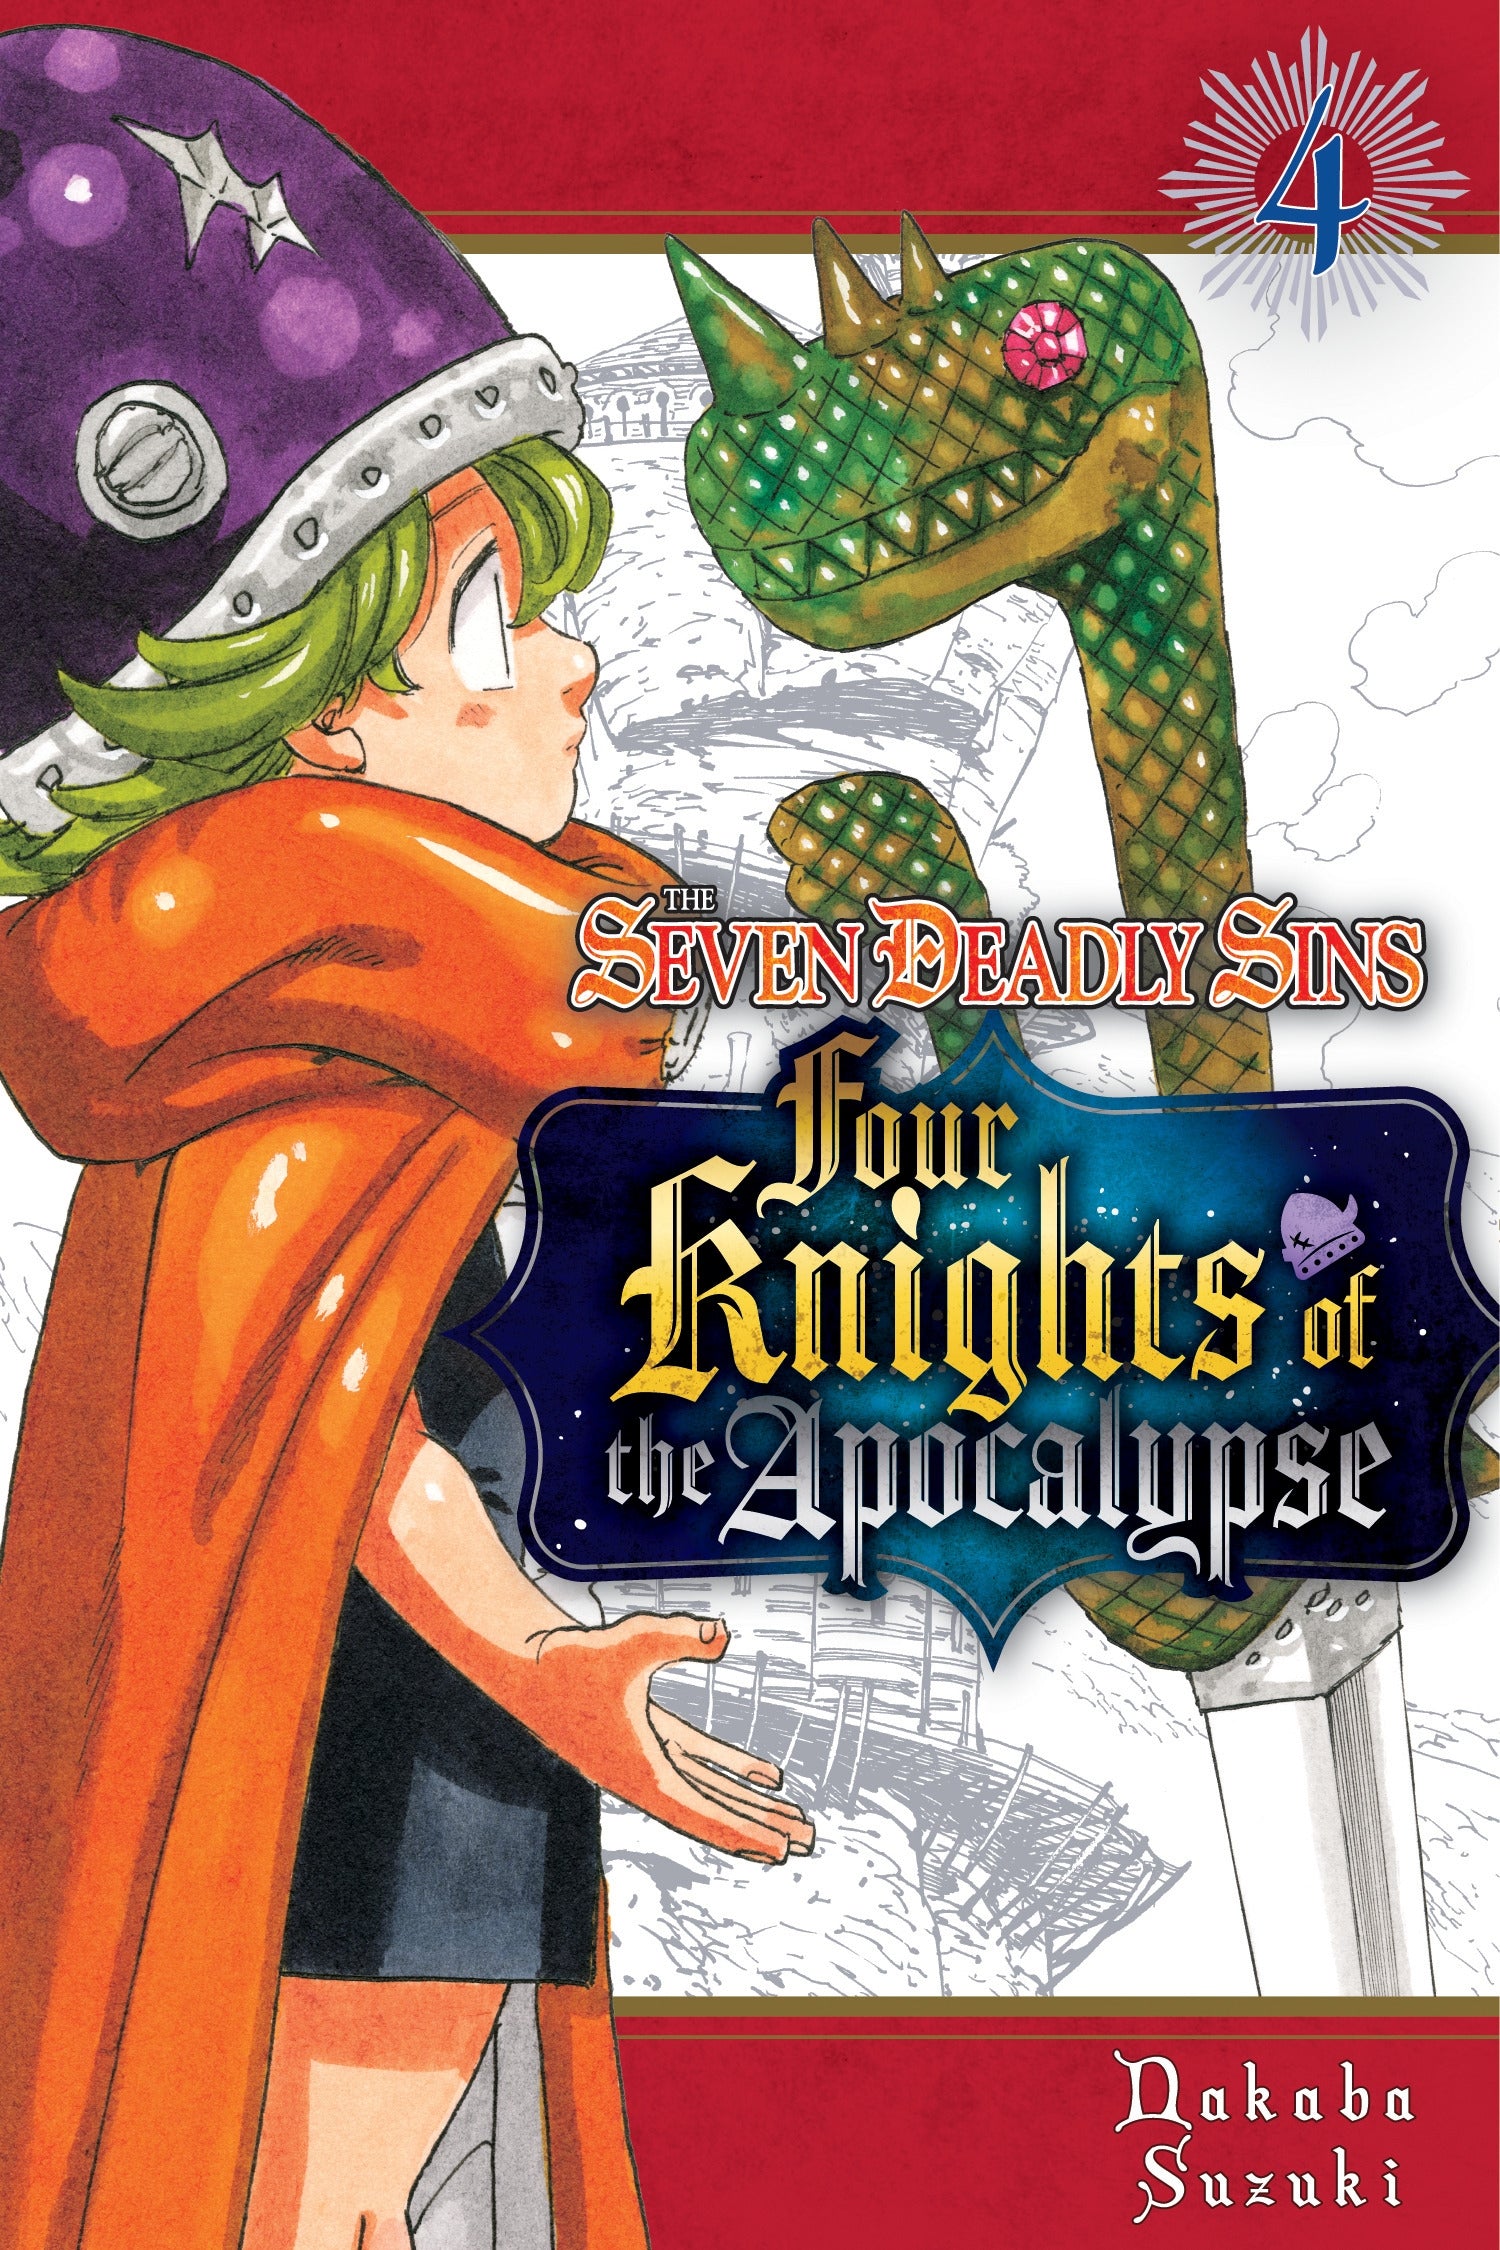 The Seven Deadly Sins Four Knights of the Apocalypse Vol.4